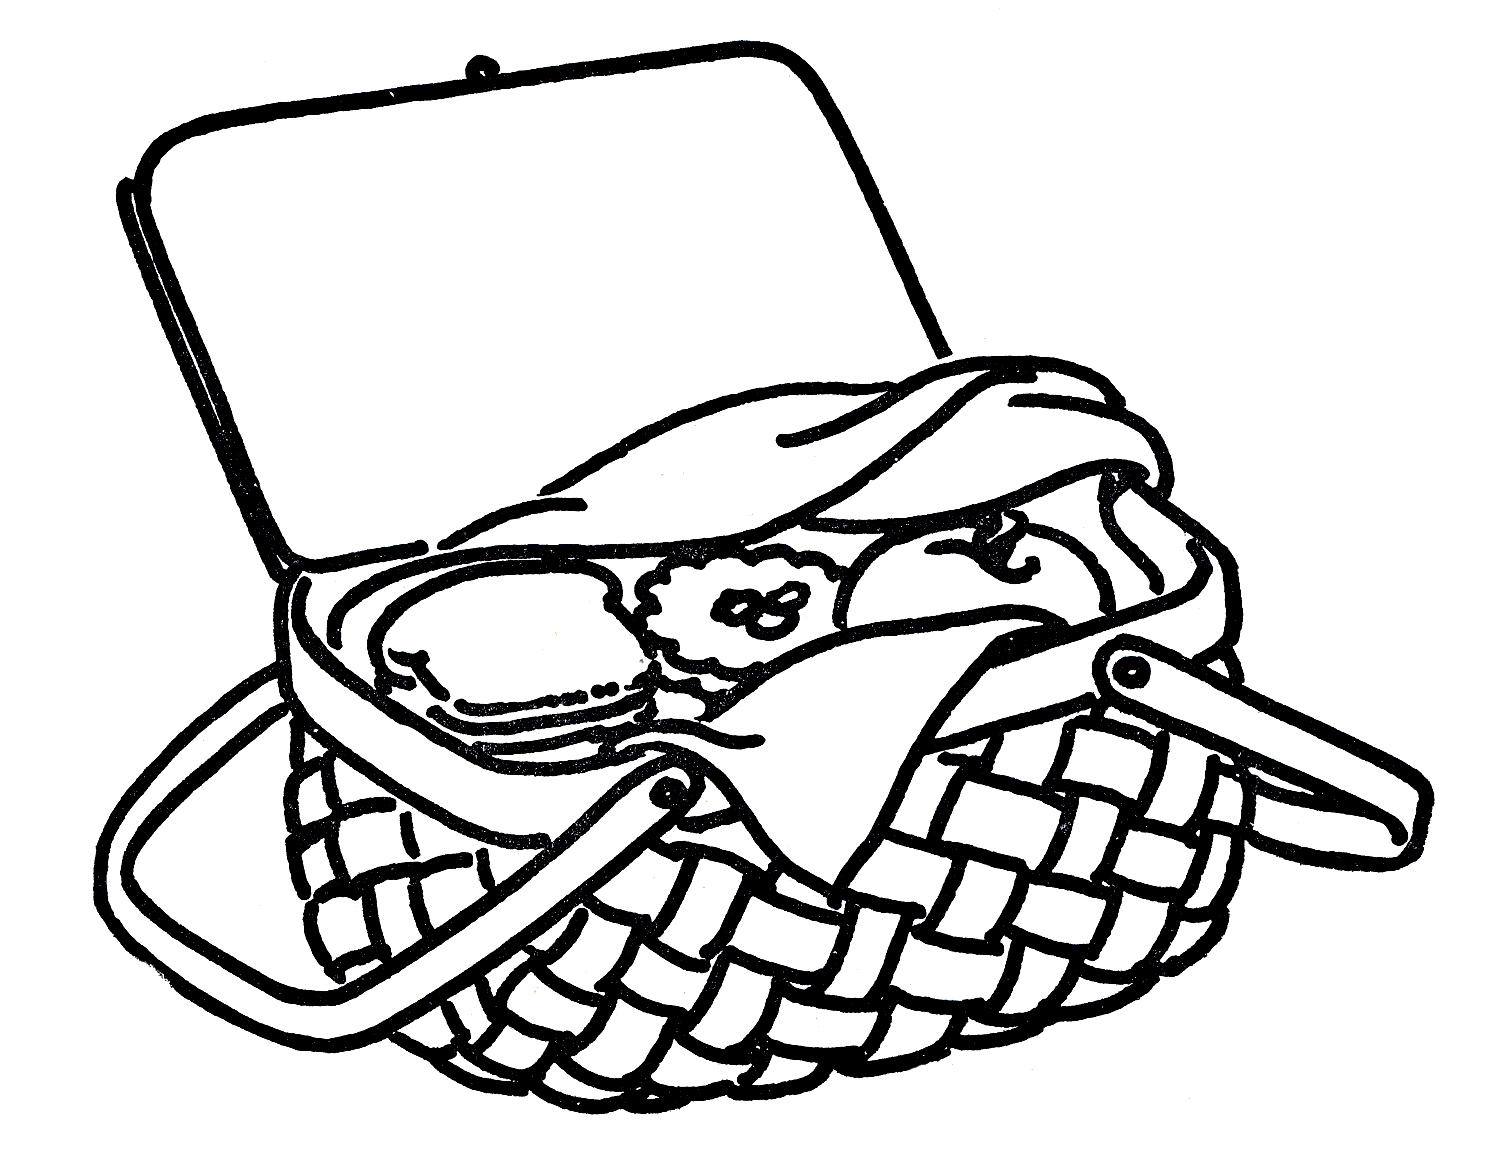 Vintage Line Art Drawing - Picnic Basket - The Graphics Fairy